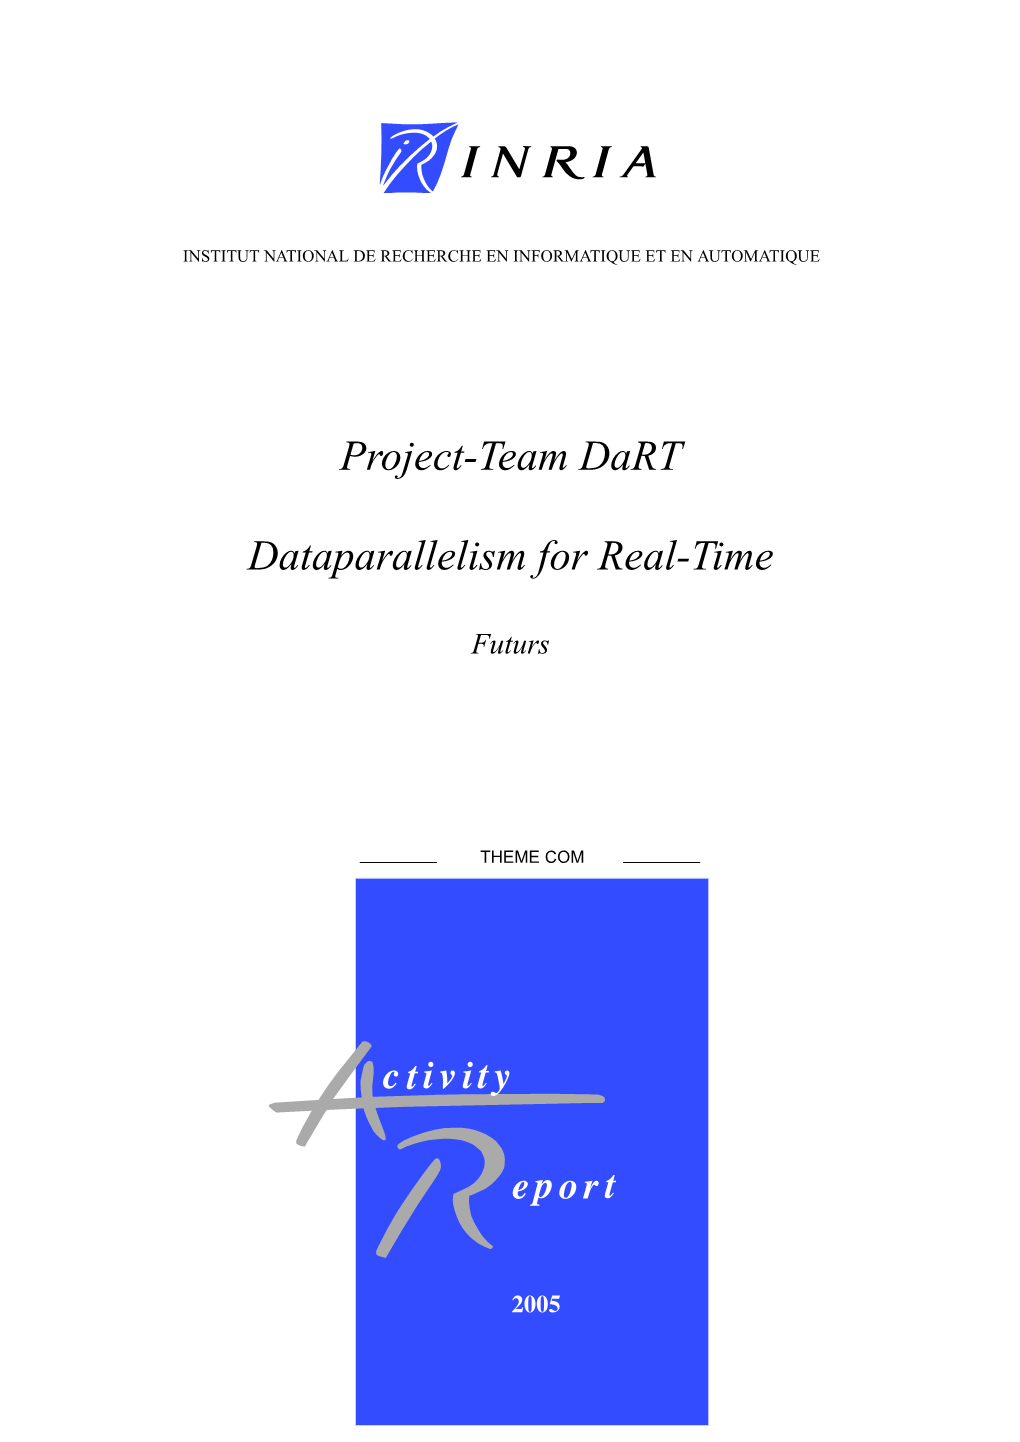 Project-Team Dart Dataparallelism for Real-Time